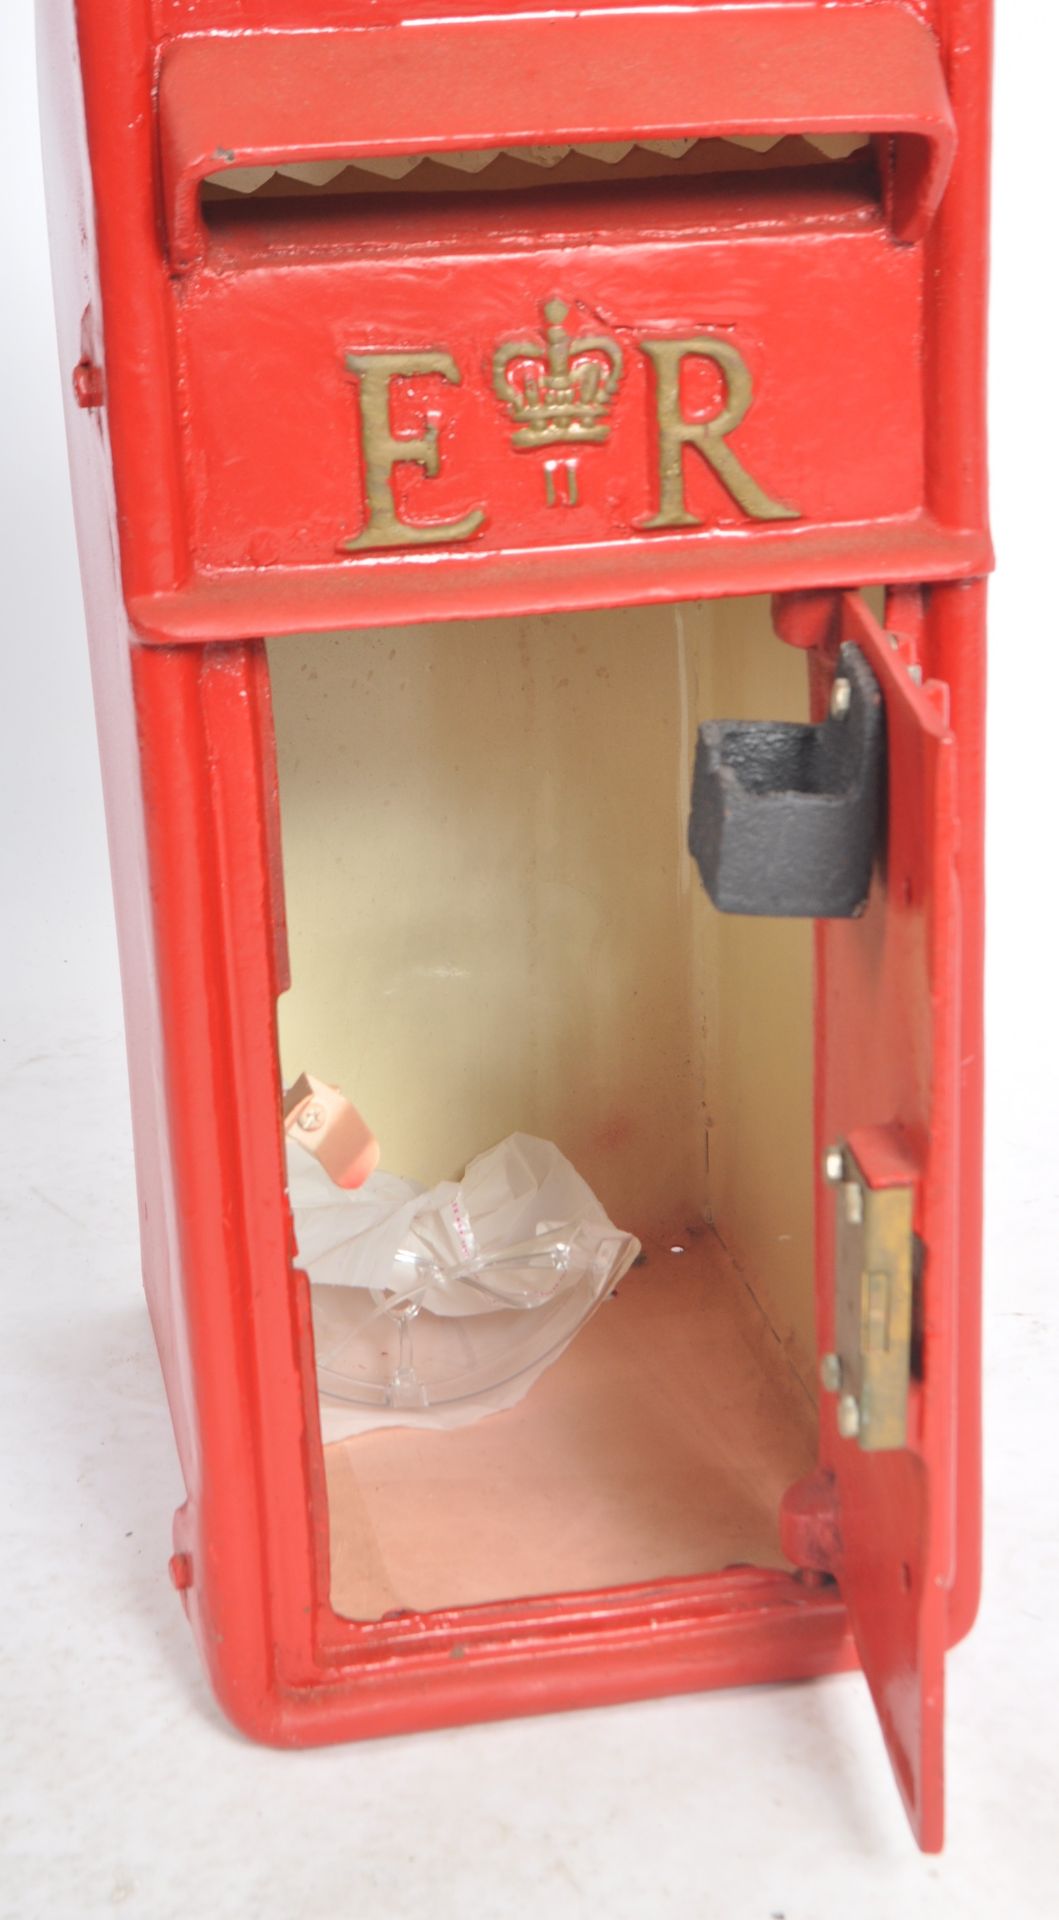 CONTEMPORARY REPLICA ROYAL MAIL POST BOX - Image 4 of 5